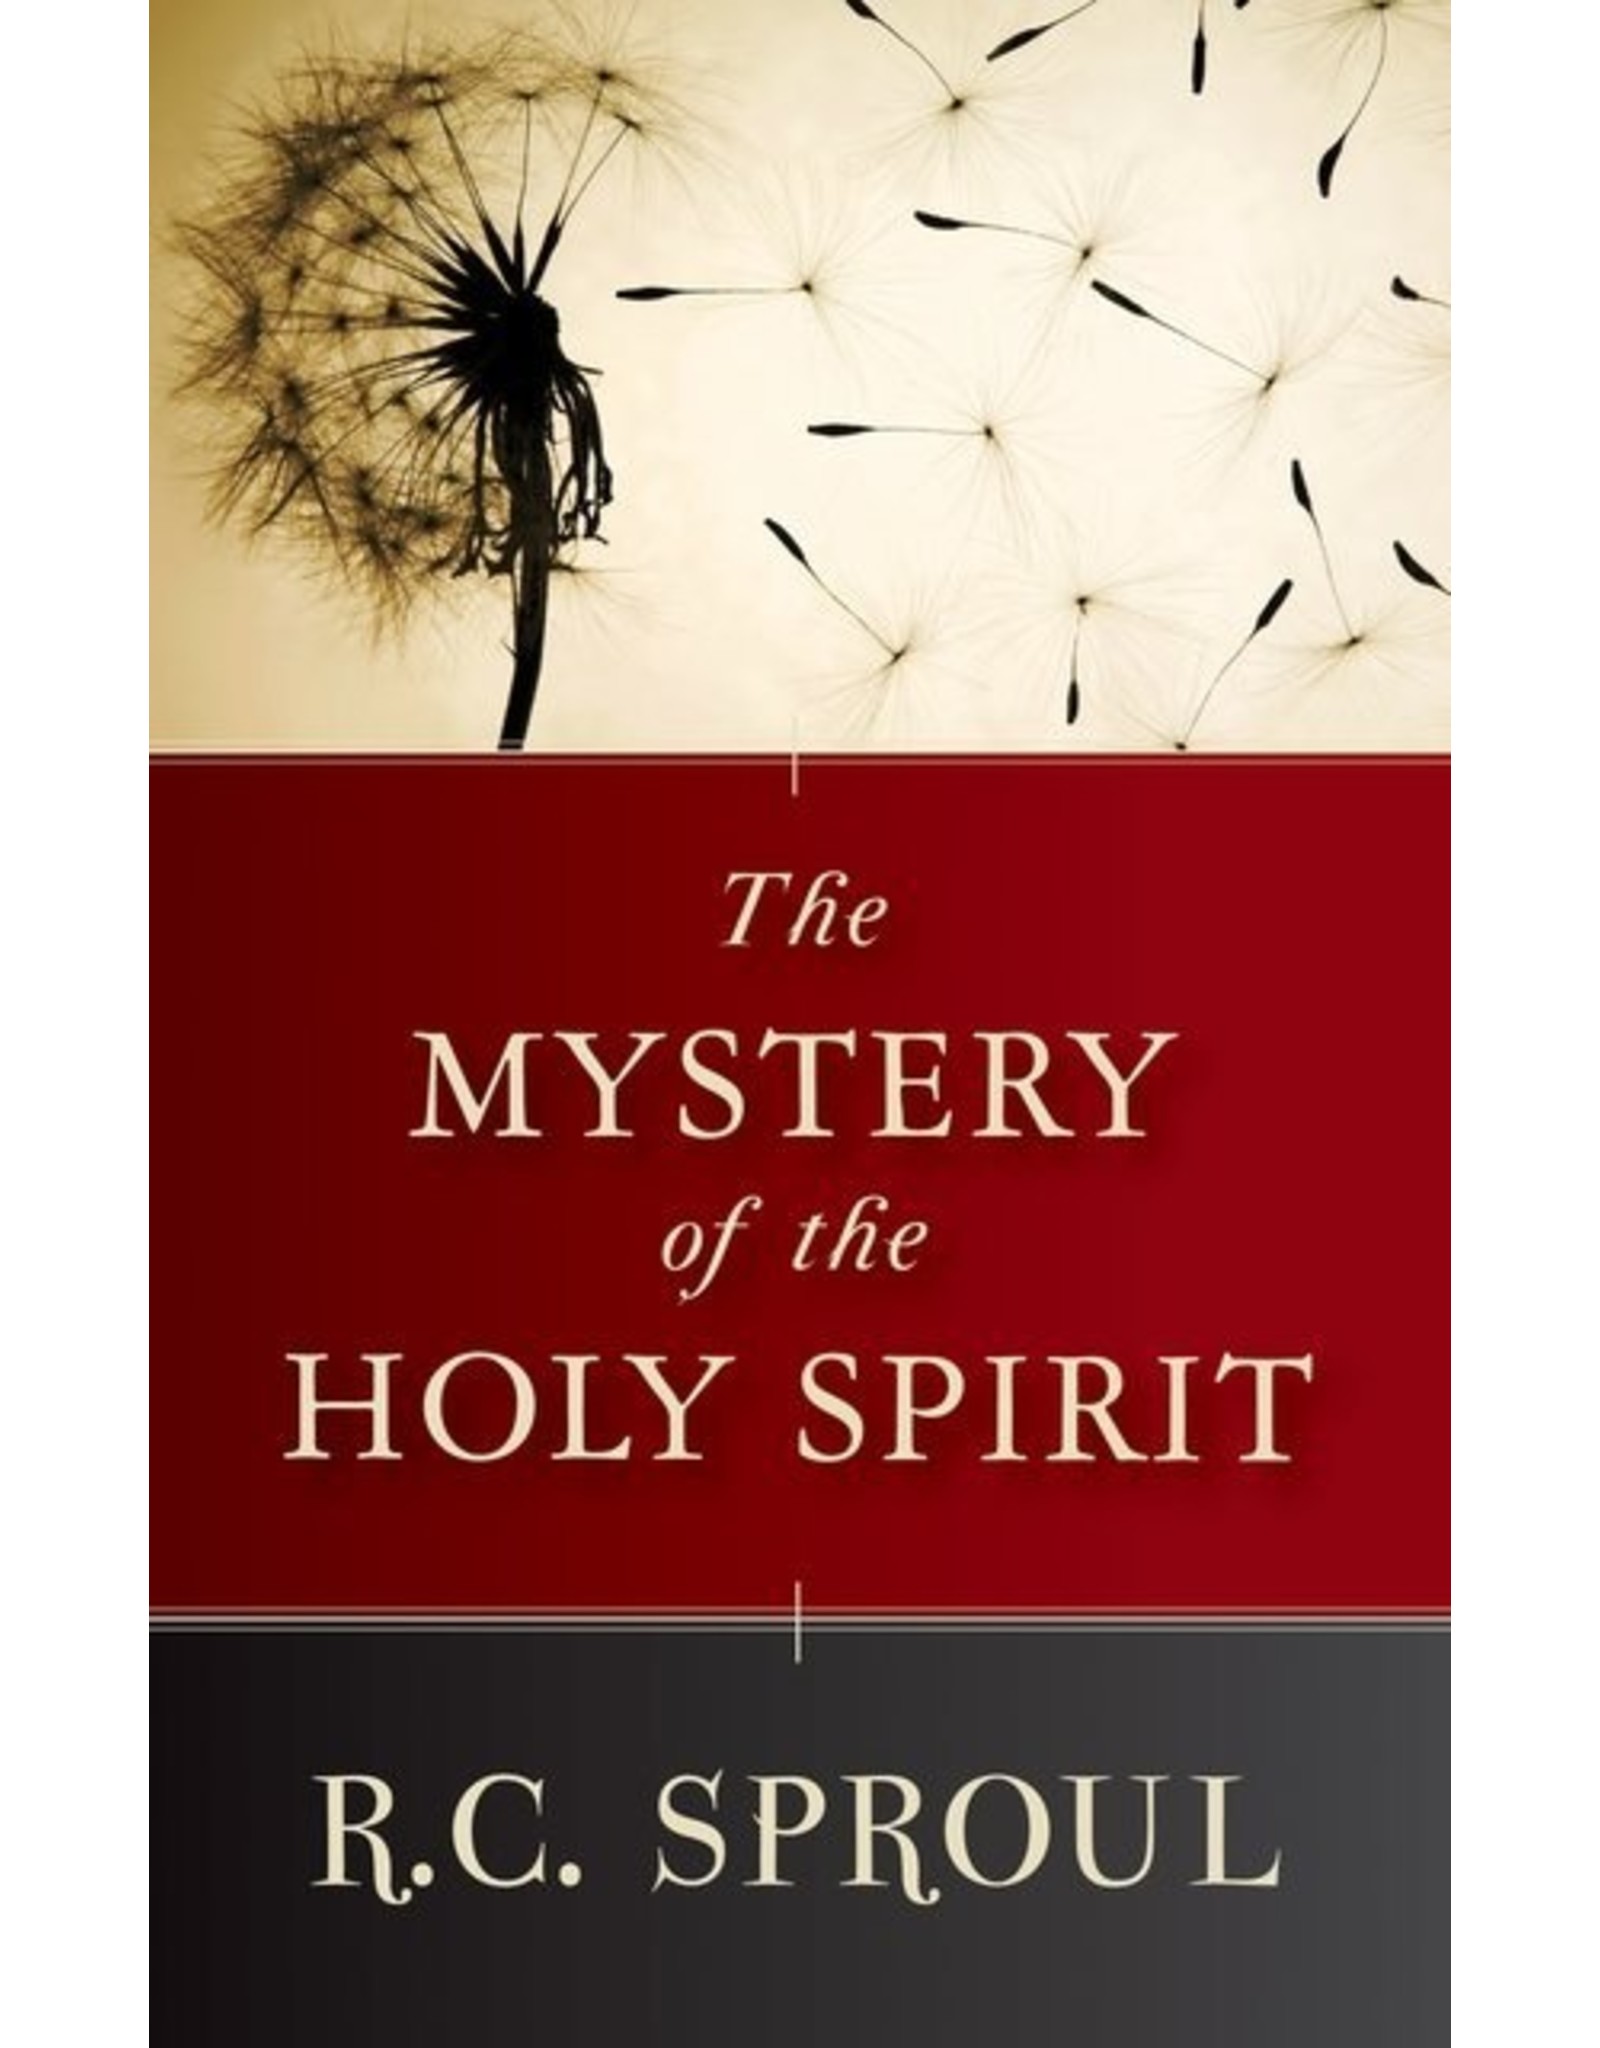 R C Sproul Mystery of the Holy Spirit